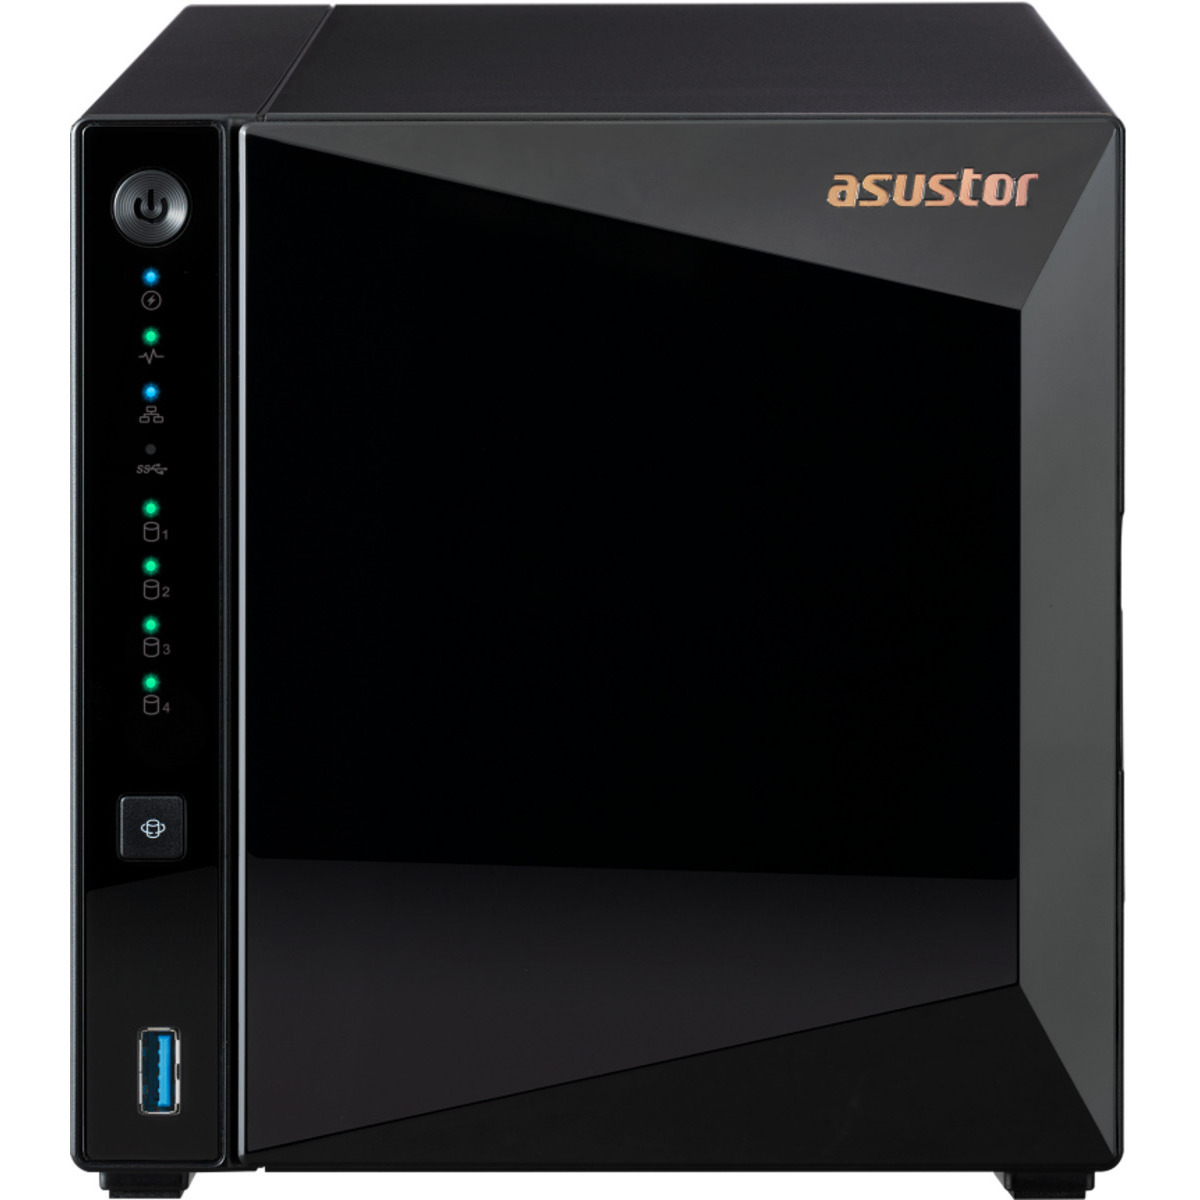 ASUSTOR DRIVESTOR 4 Pro Gen2 AS3304T v2 8tb 4-Bay Desktop Personal / Basic Home / Small Office NAS - Network Attached Storage Device 4x2tb Sandisk Ultra 3D SDSSDH3-2T00 2.5 560/520MB/s SATA 6Gb/s SSD CONSUMER Class Drives Installed - Burn-In Tested - ON SALE DRIVESTOR 4 Pro Gen2 AS3304T v2